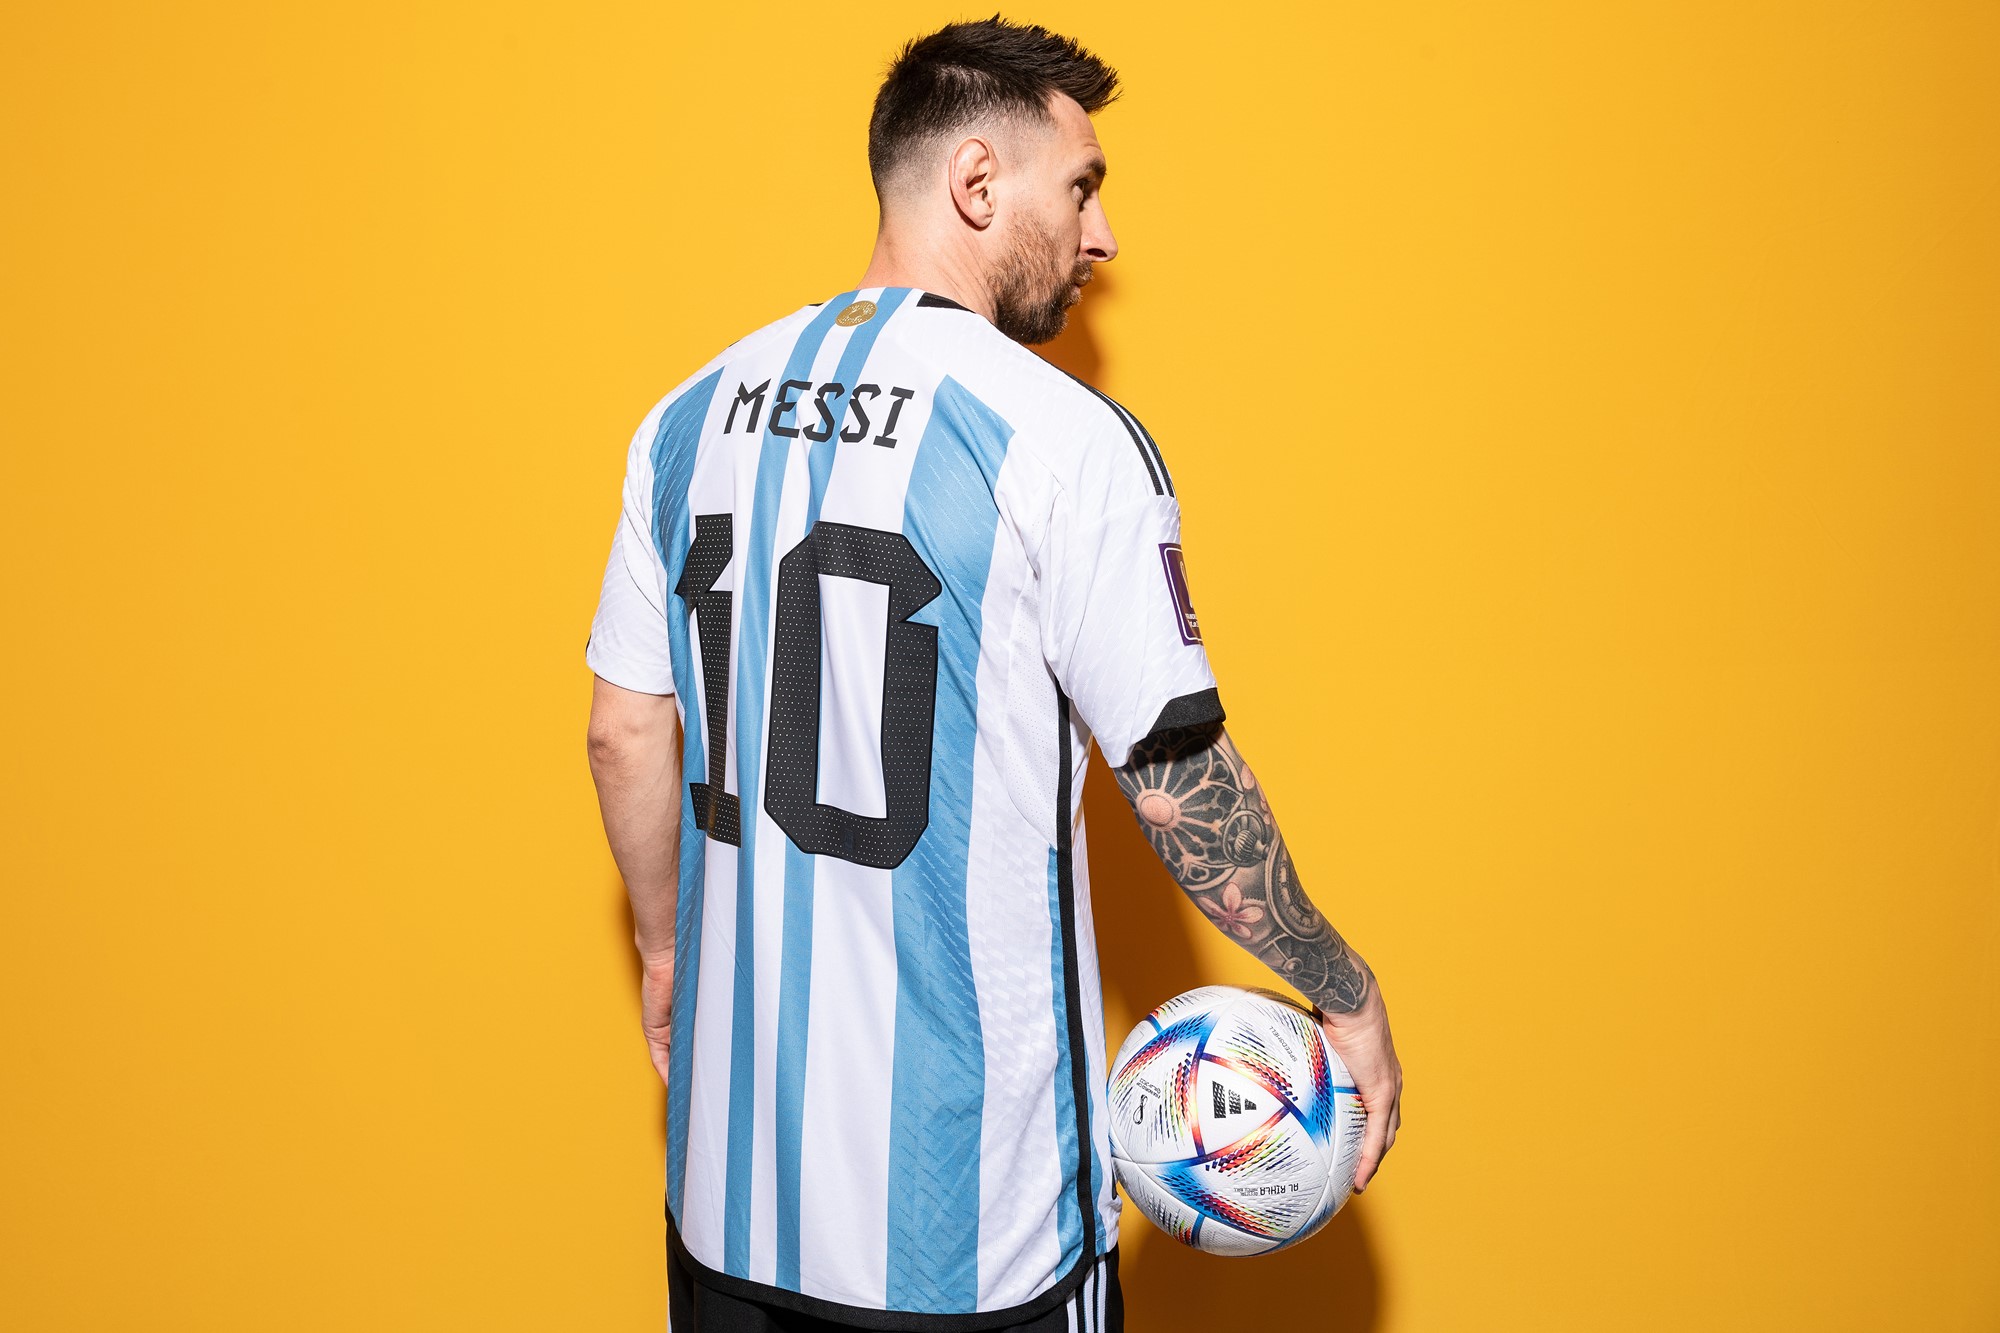 Lionel Messi holding a ball